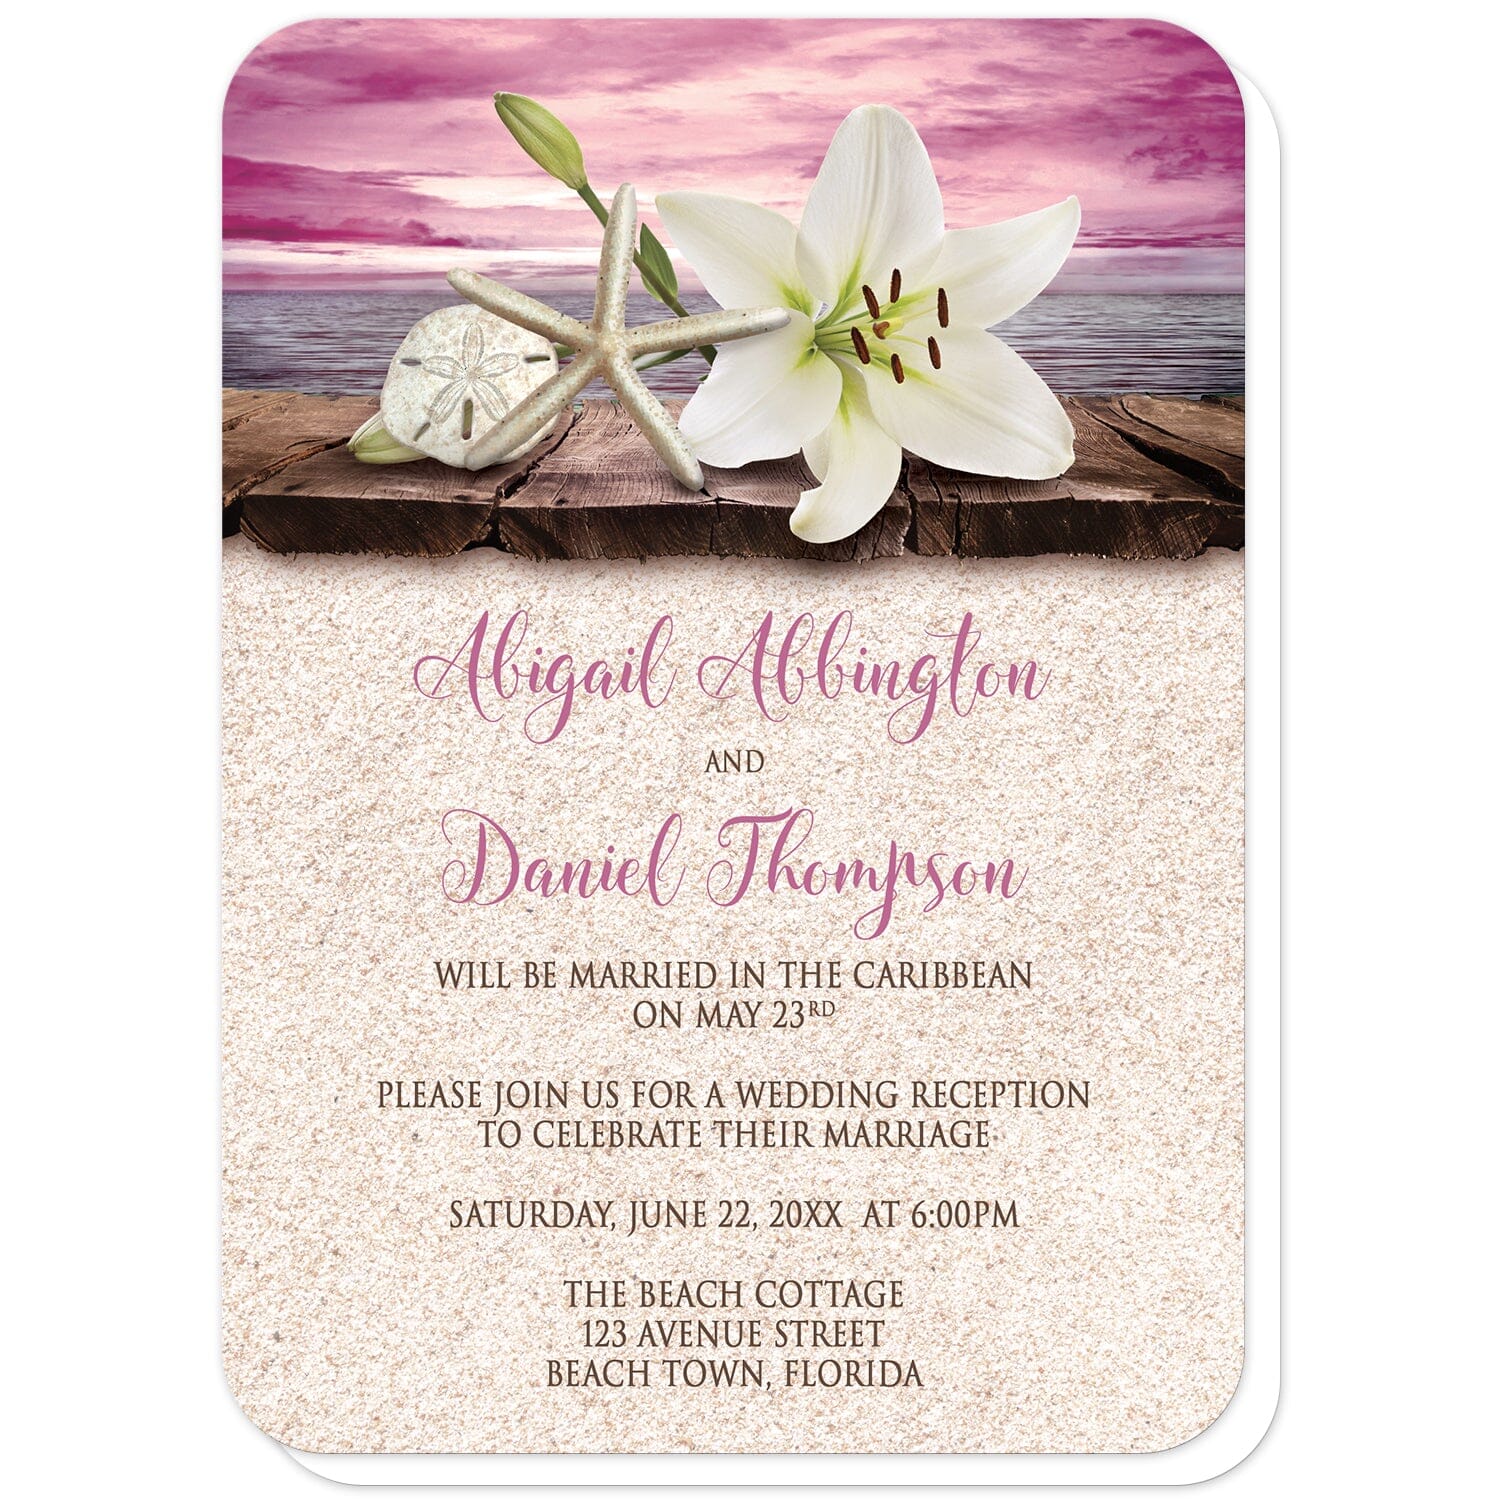 Lily Seashells and Sand Magenta Beach Reception Only Invitations (with rounded corners) at Artistically Invited. Tropical lily seashells and sand magenta beach reception only invitations with an elegant white lily, a starfish, and a sand dollar on a rustic wood dock overlooking the open water under a magenta sunset sky. Your personalized post-wedding reception celebration details are custom printed in dark brown and magenta over a beige sand background design.